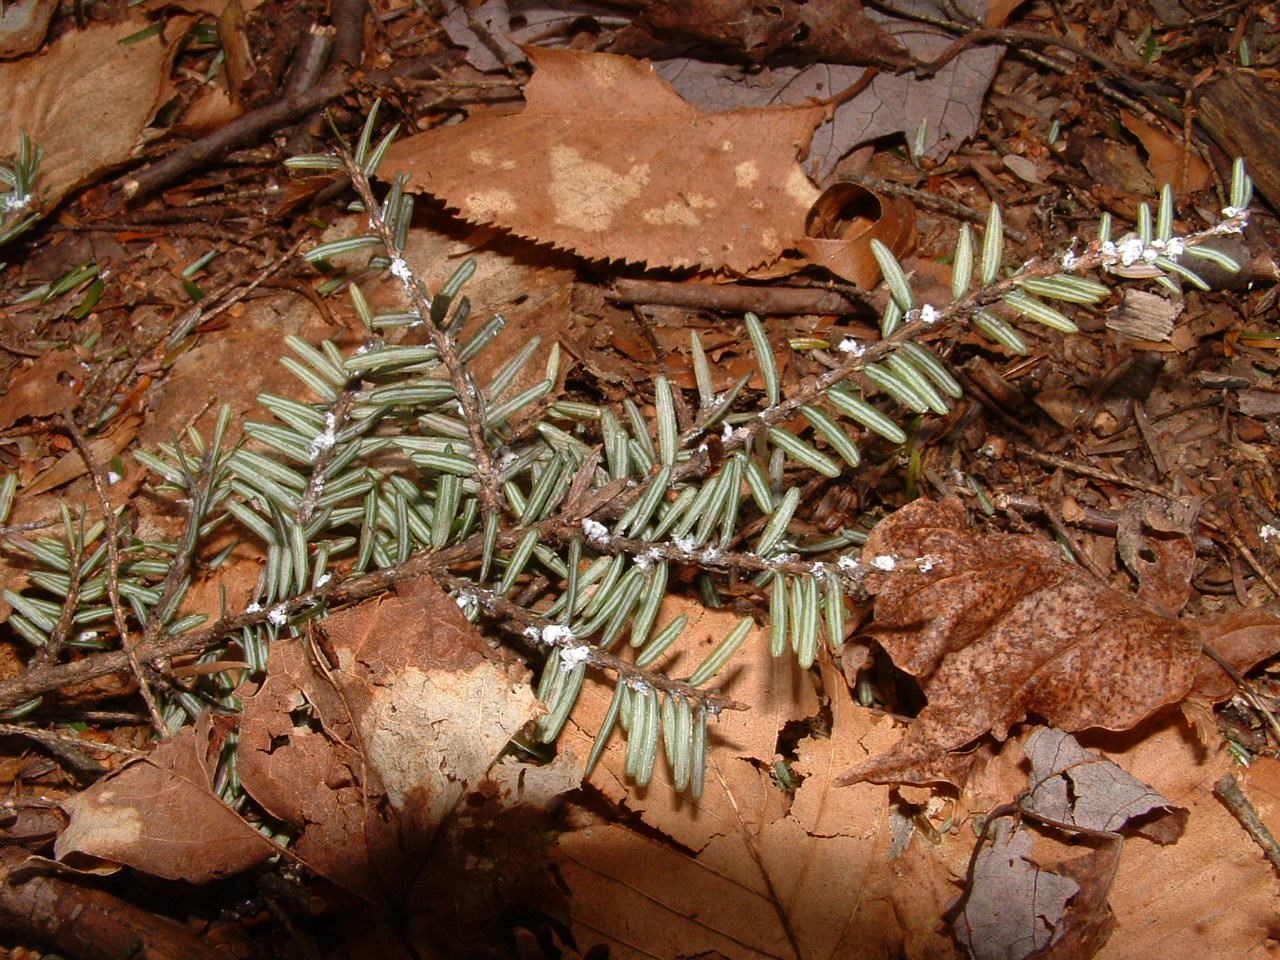 A hemlock twig is dotted with fuzzy white spots.